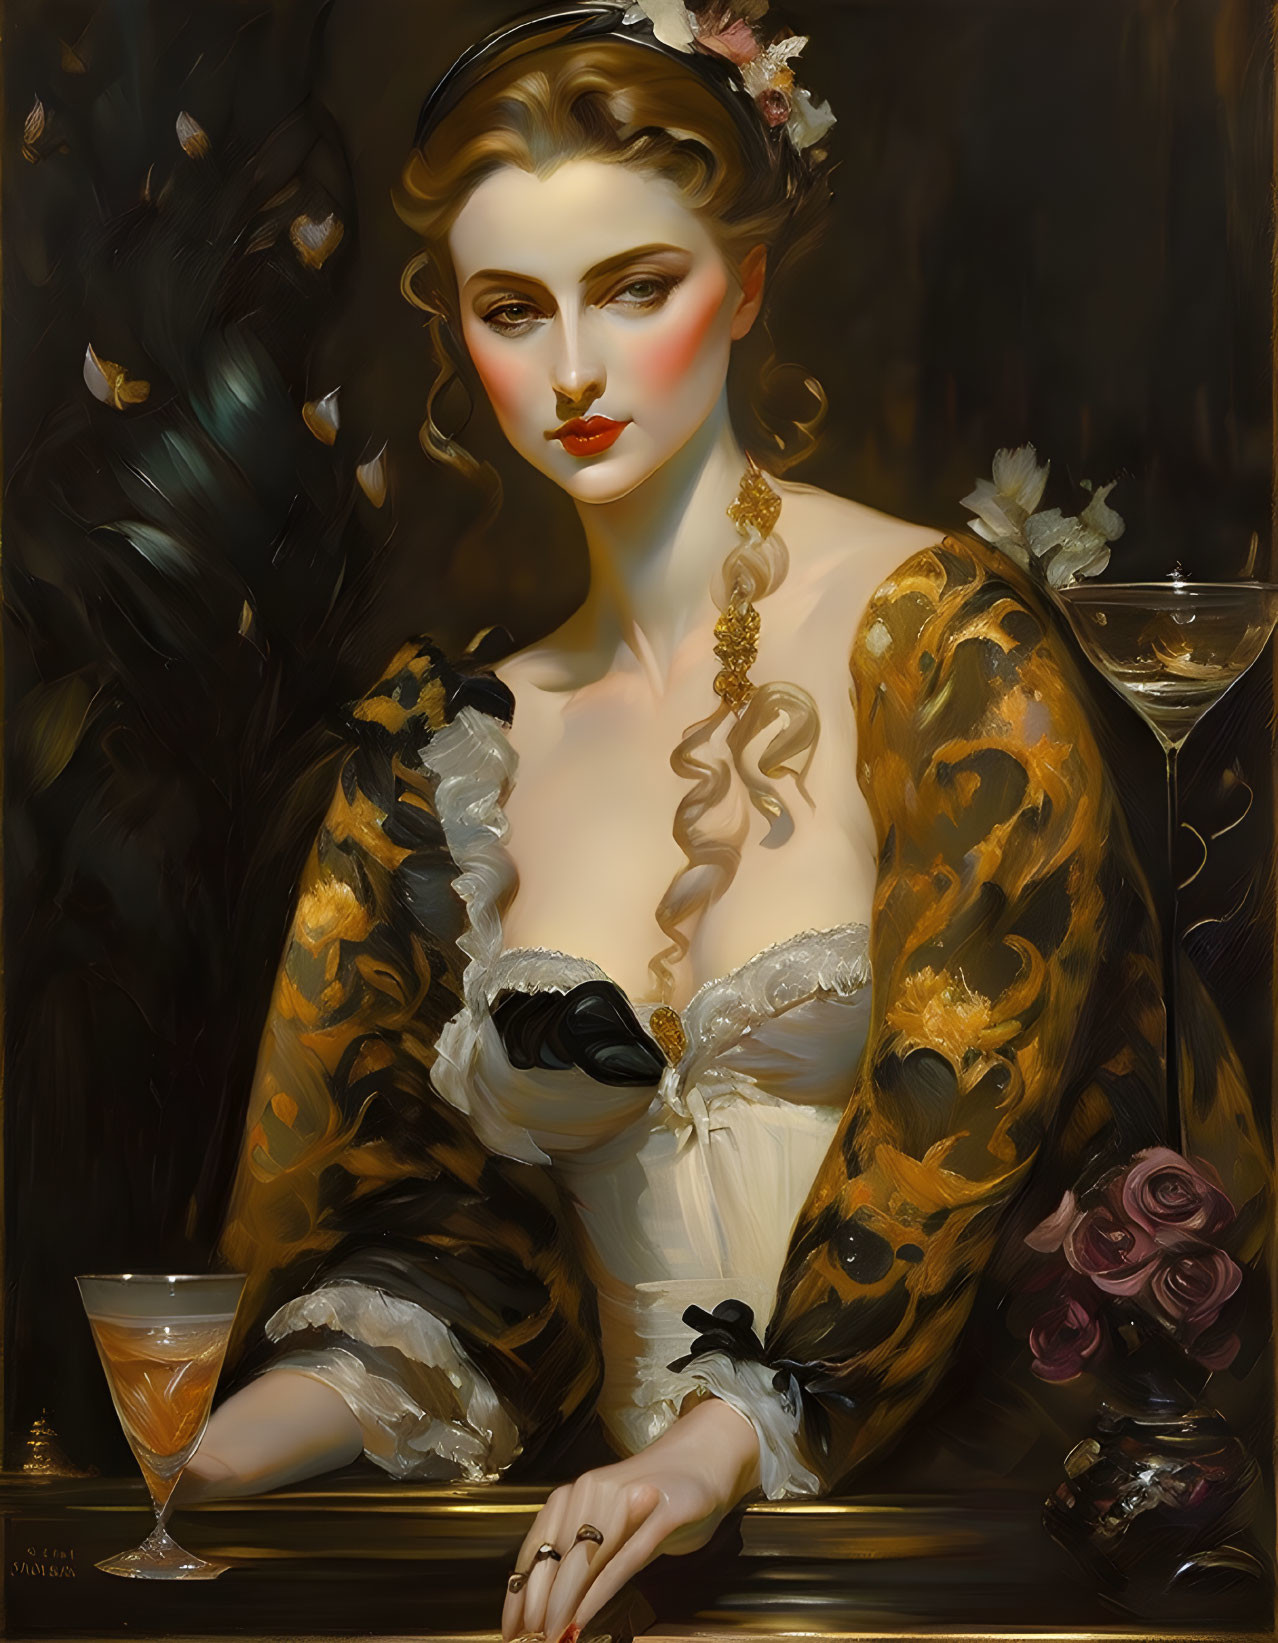 Curled Hairstyle Woman in White and Black Gown with Leopard Print Shawl Sitting at Table